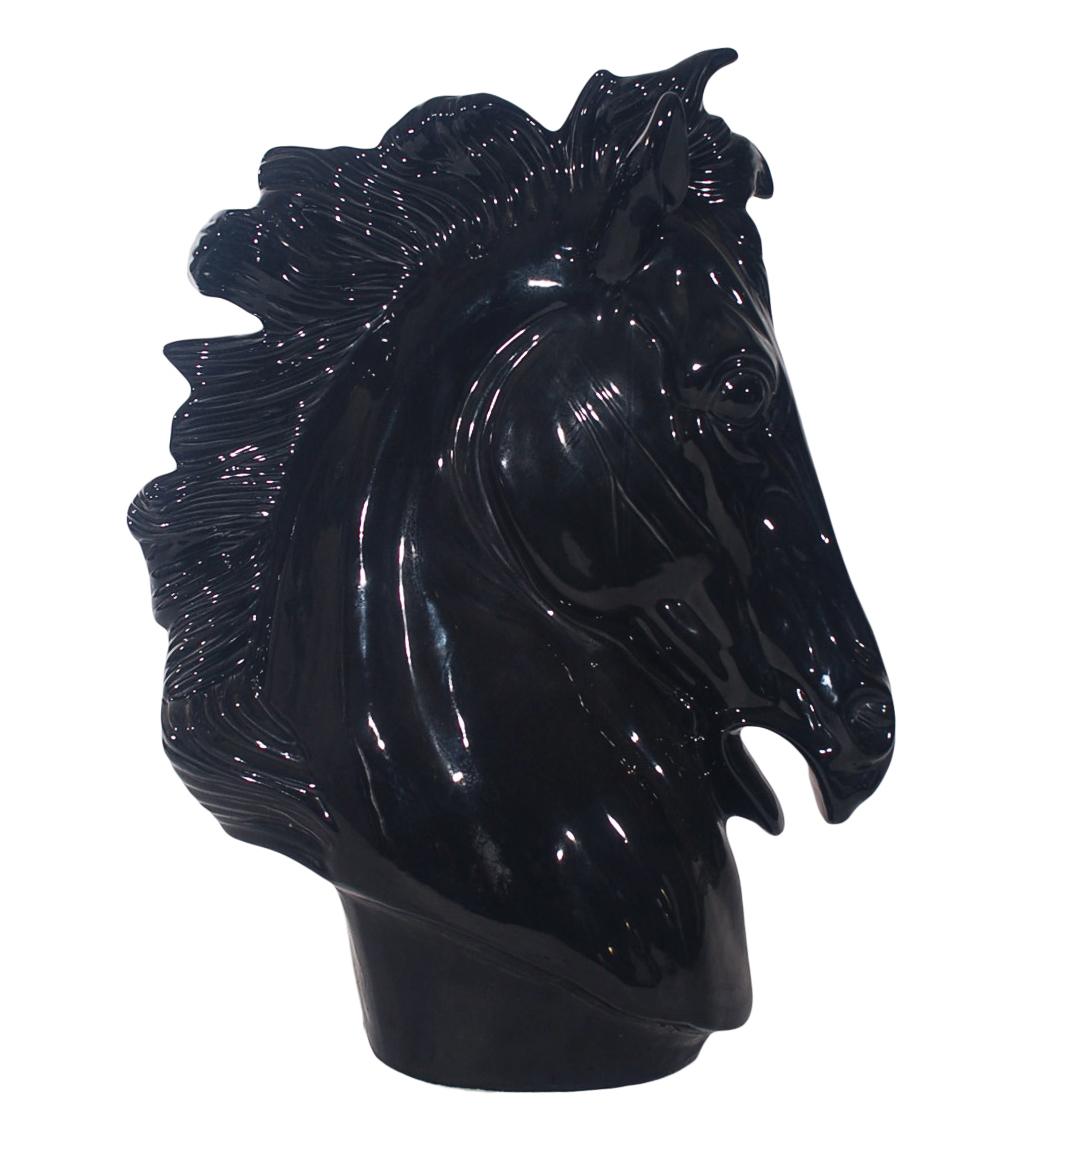 Mexican Large Midcentury Postmodern Black Ceramic Horse Head Pottery Sculpture